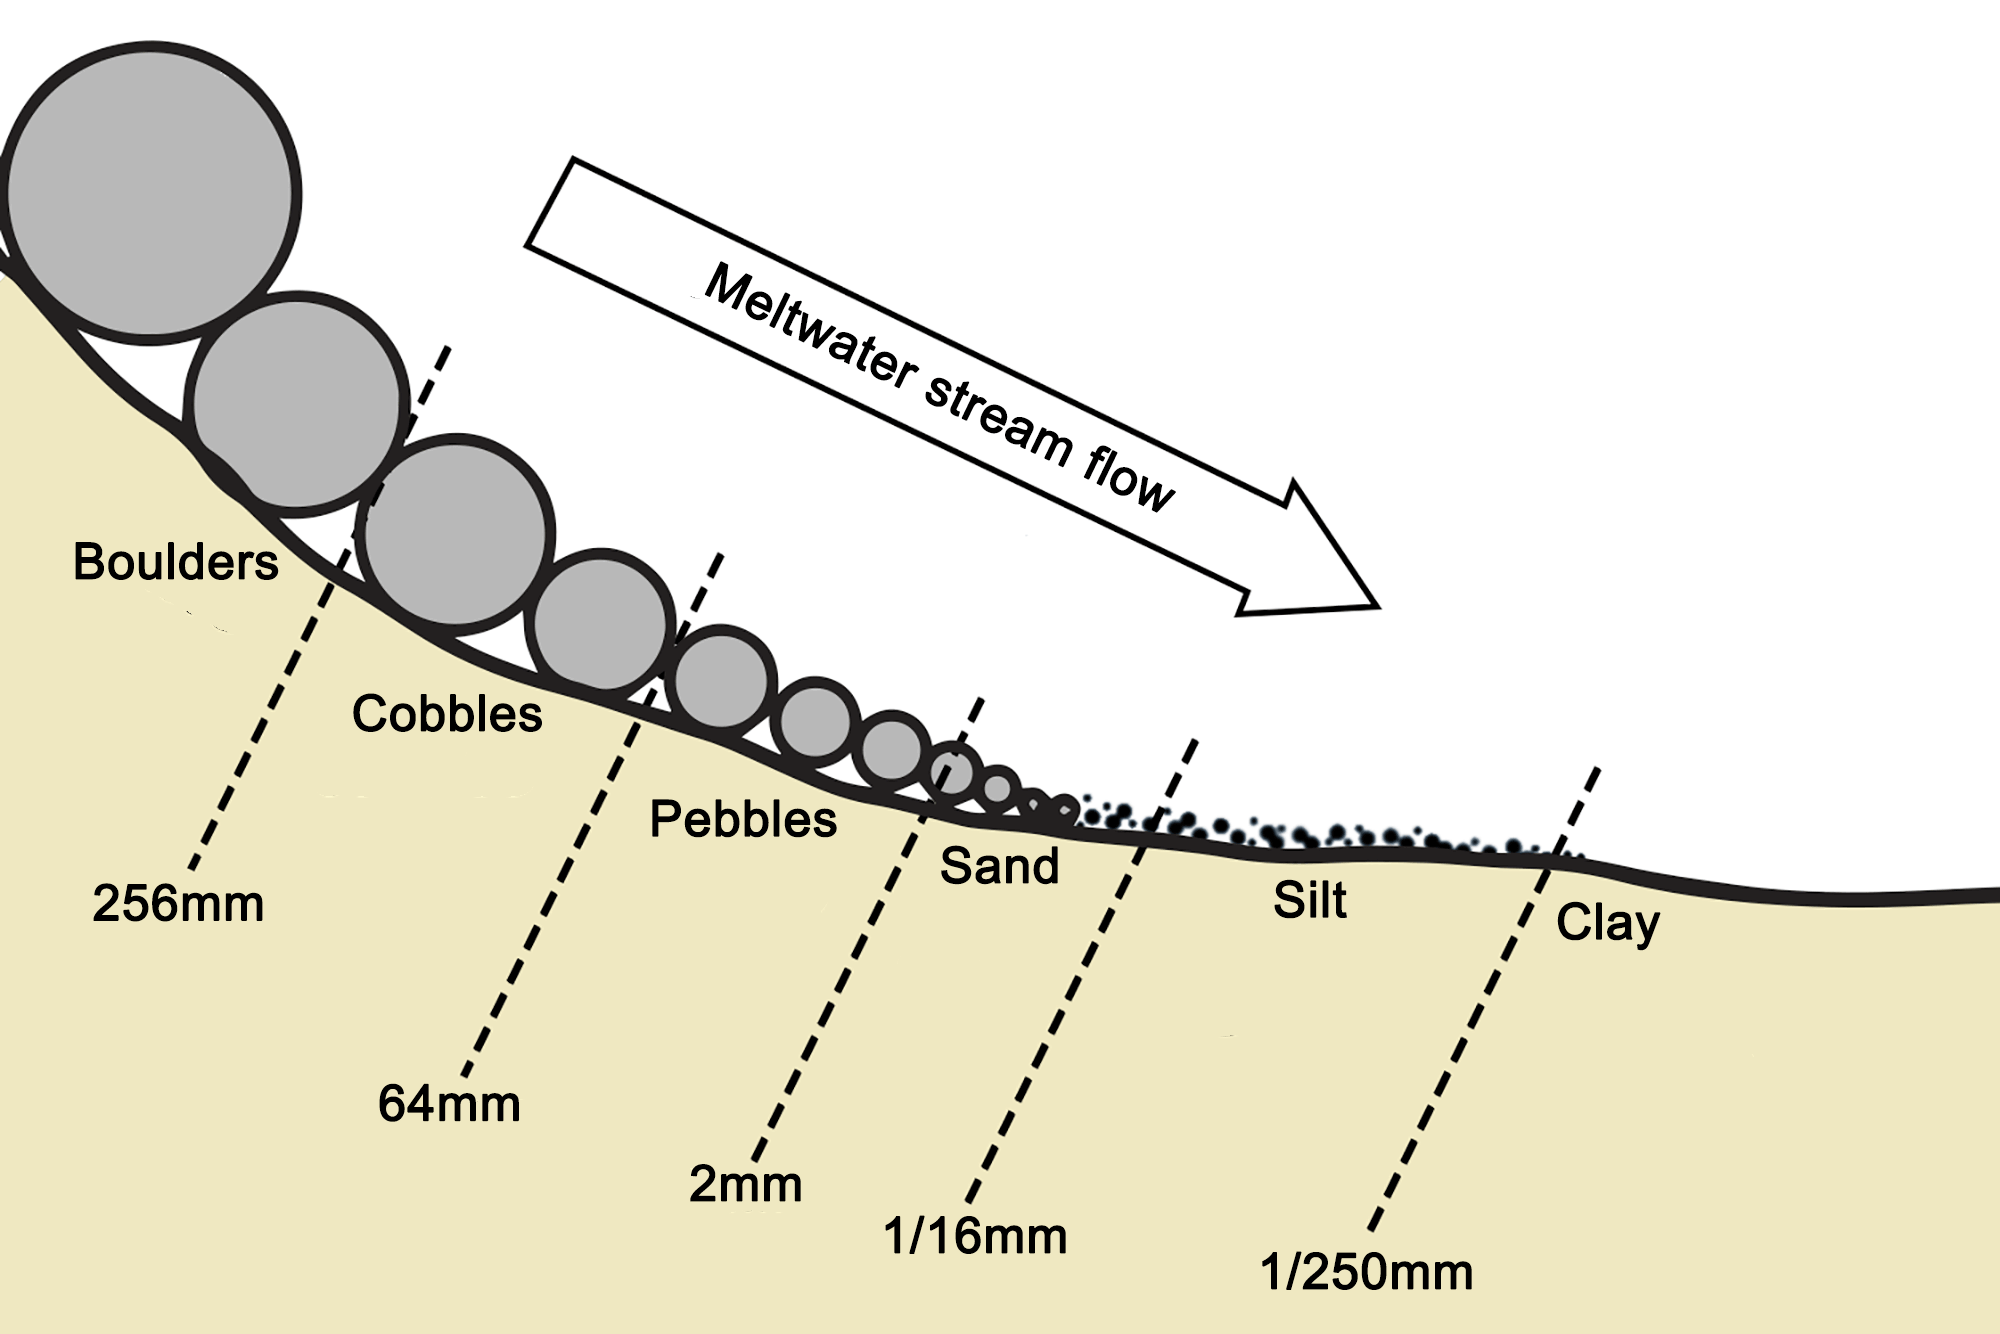 Diagram showing how sediment size decreases as the energy carrying the sediment decreases.